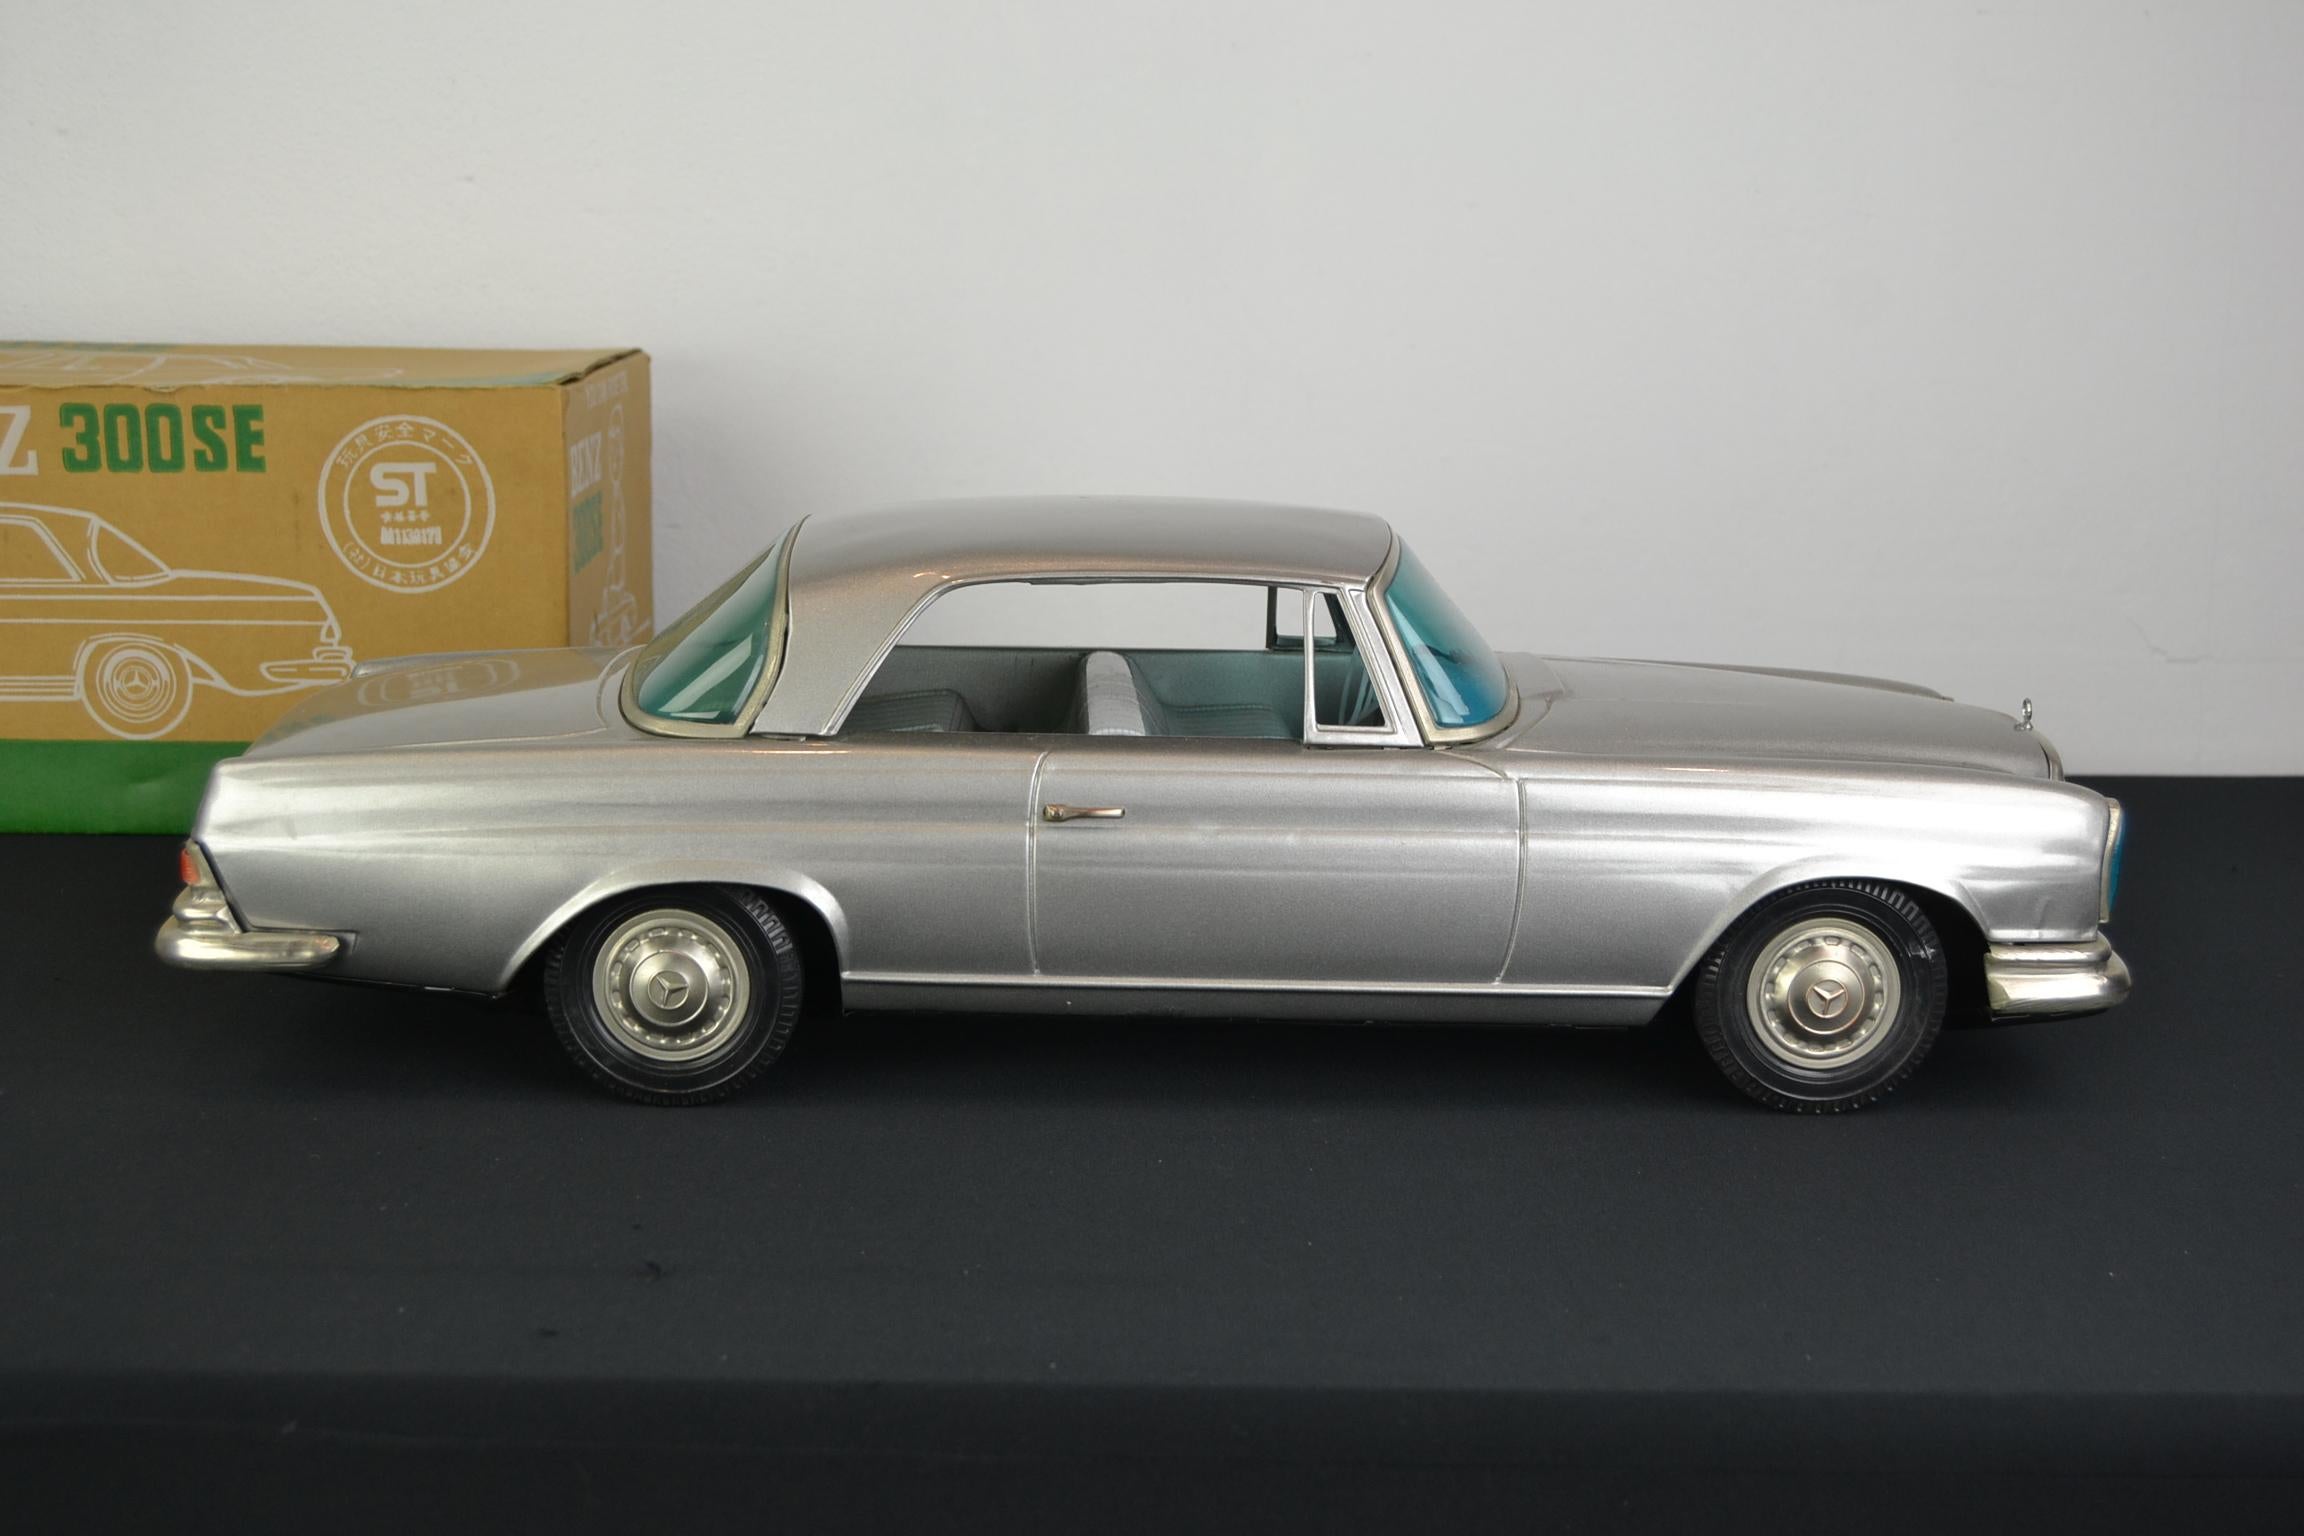 Boxed Mercedes Benz 300 SE Toy Model by Ichiko Japan, 1980s 6